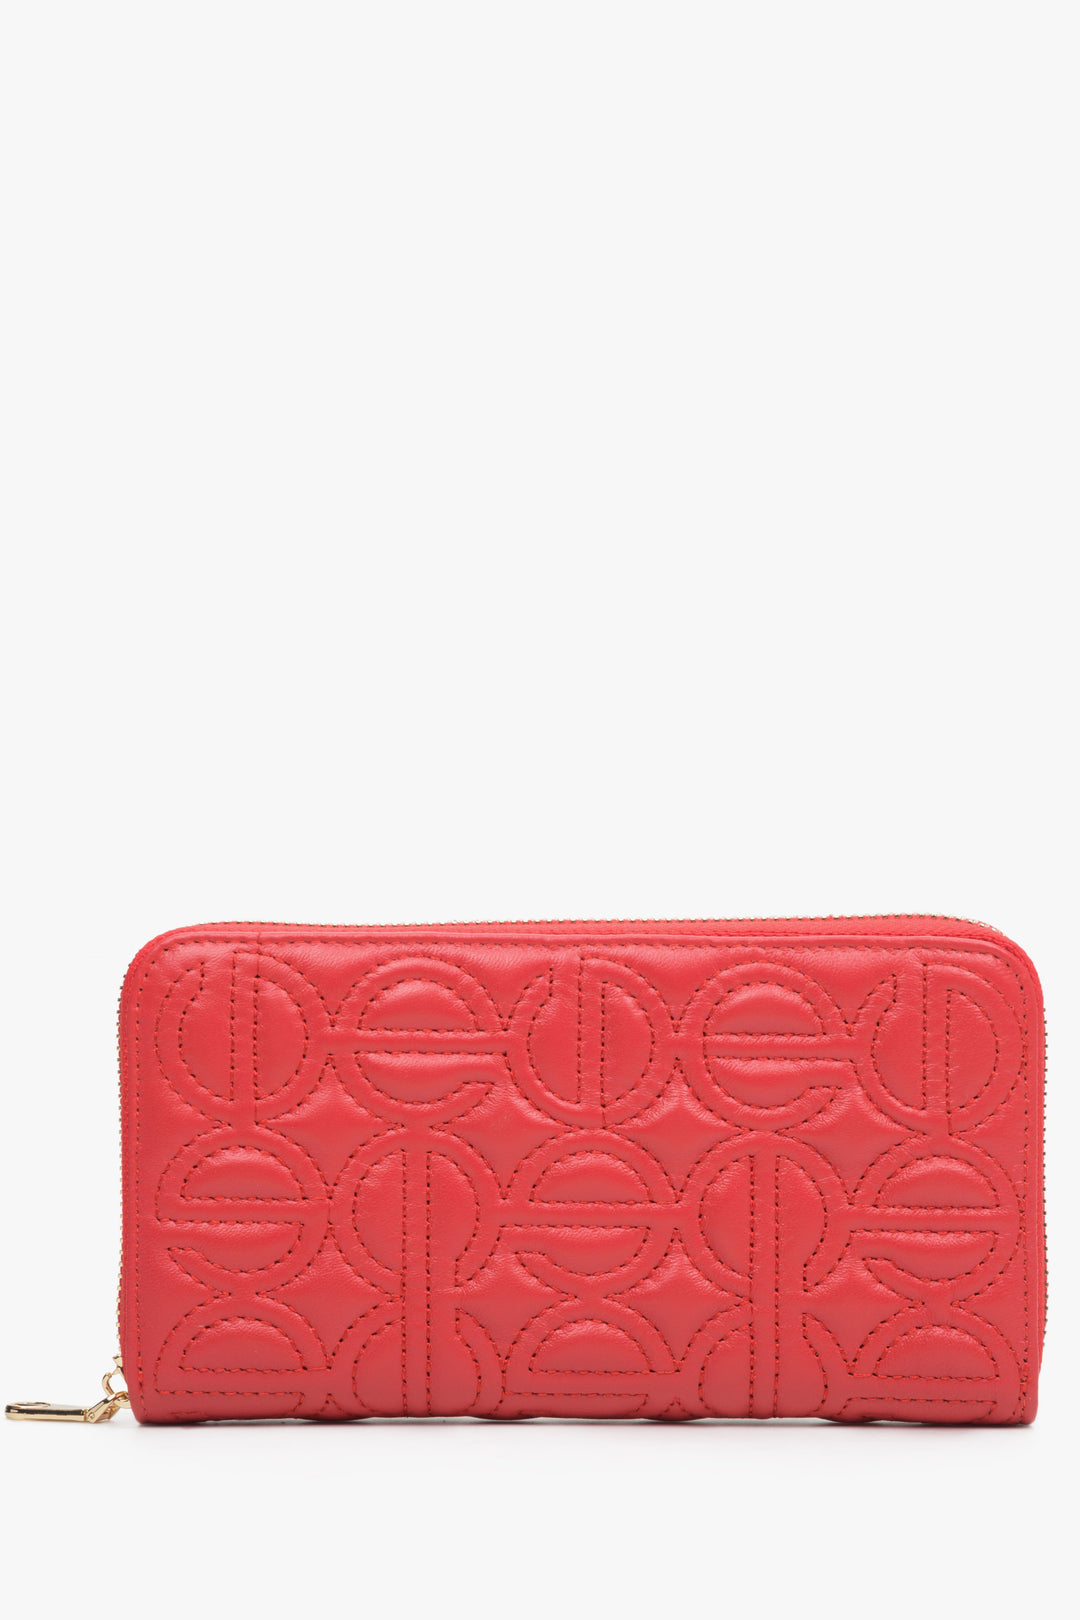 Red leather women's continental wallet with embossed Estro brand logo.